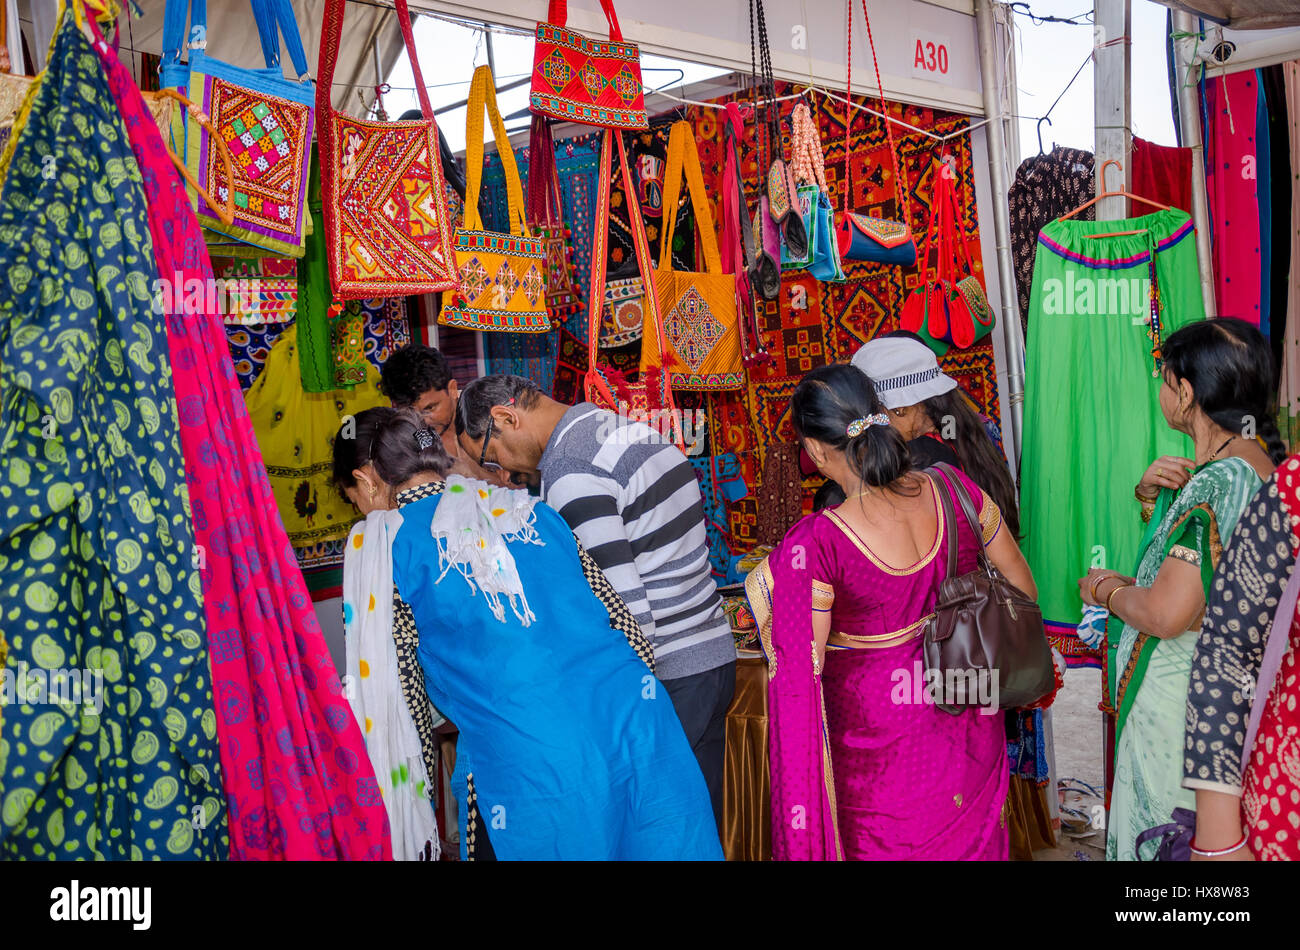 KUTCH, GUJARAT, INDIA - DECEMBER 27, 2016: An unidentified group of people at handicraft shop looking at colorful embroidery items. Stock Photo